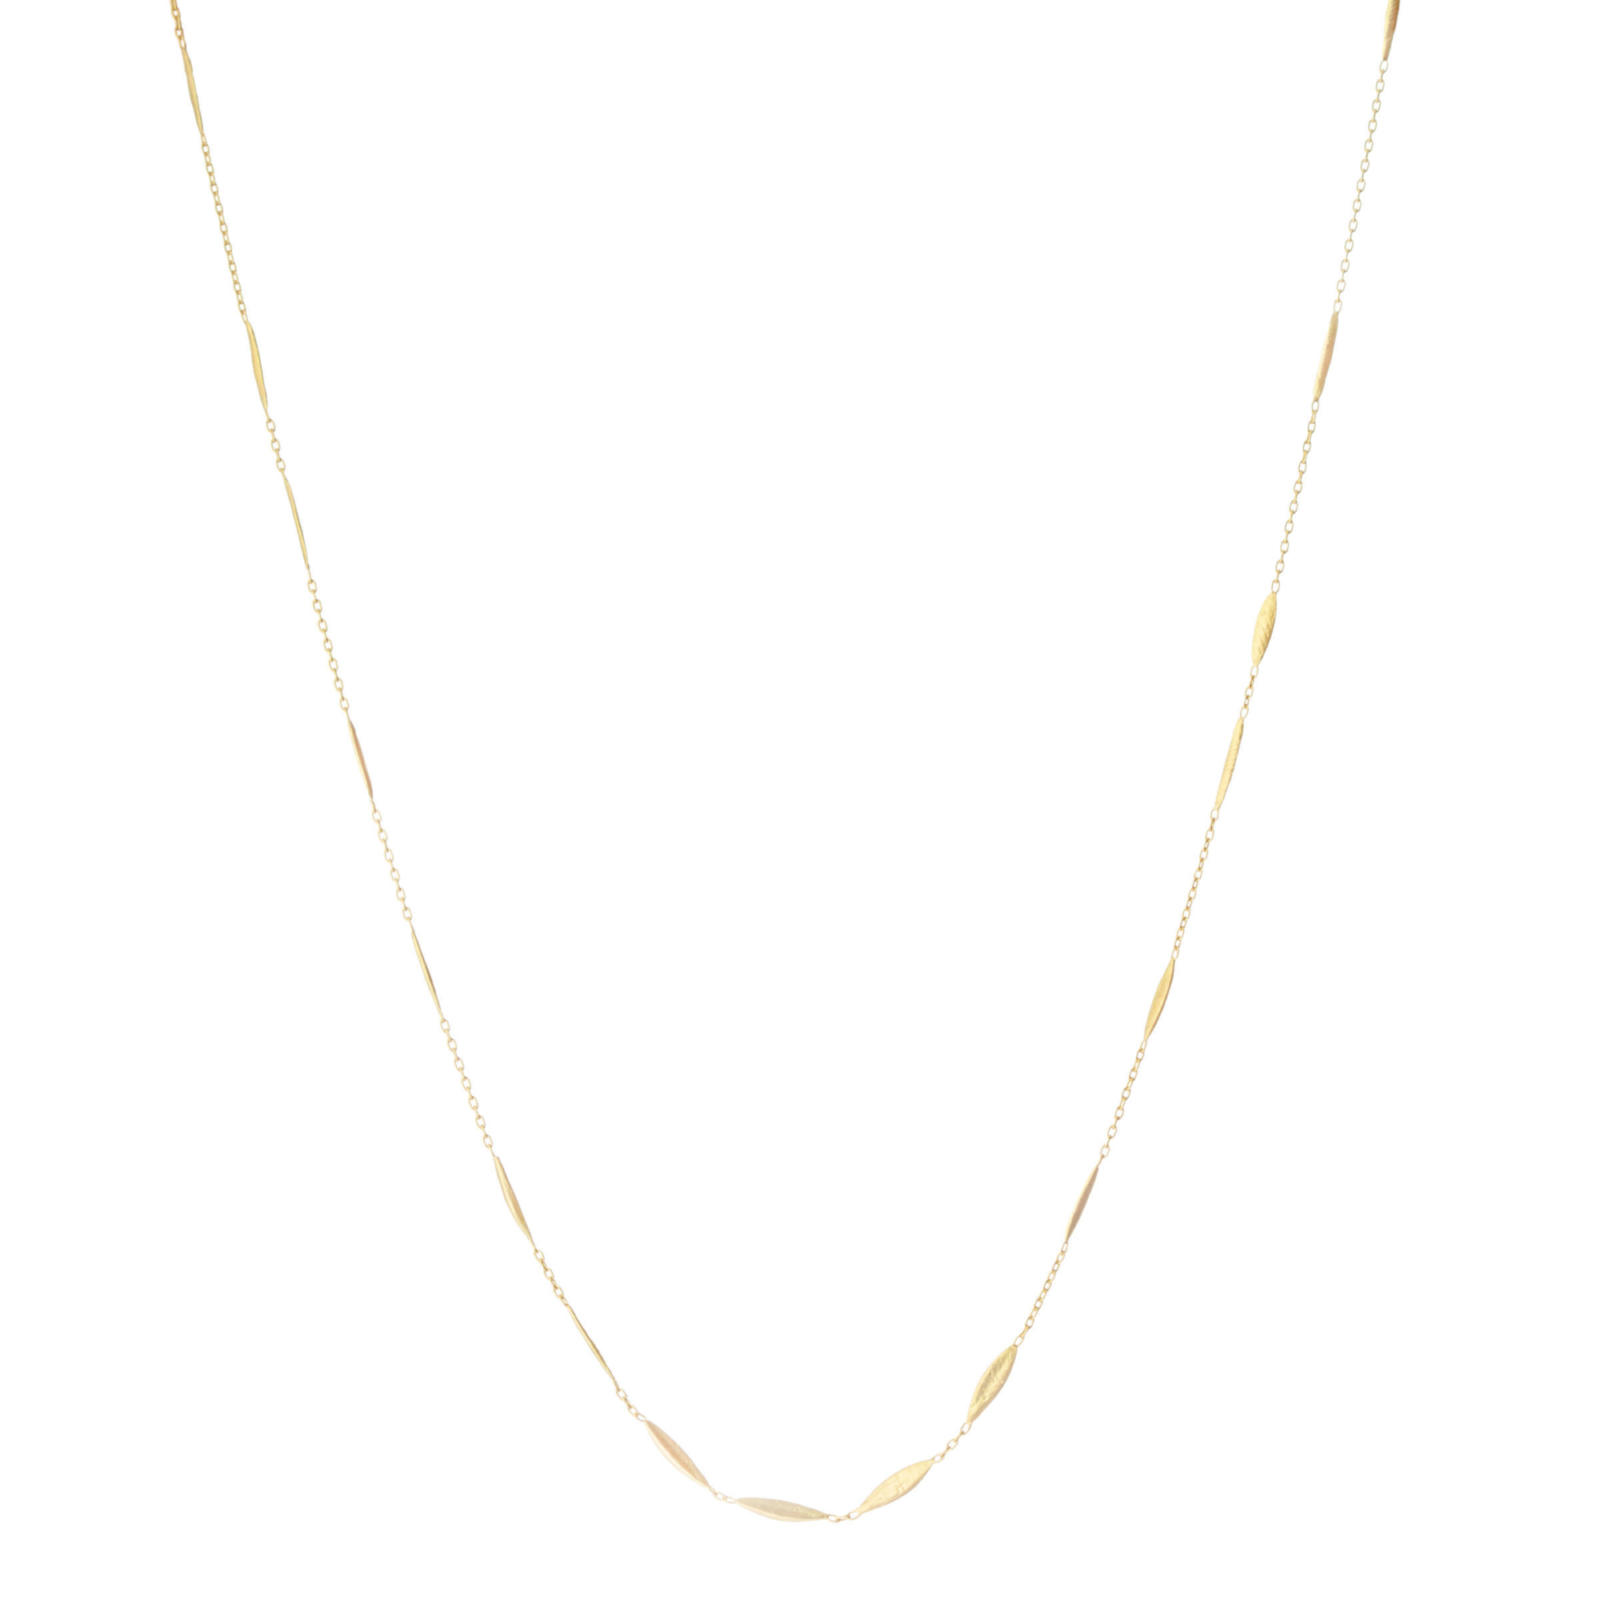 Sia Taylor MN4 Y L Yellow Gold Necklace WB